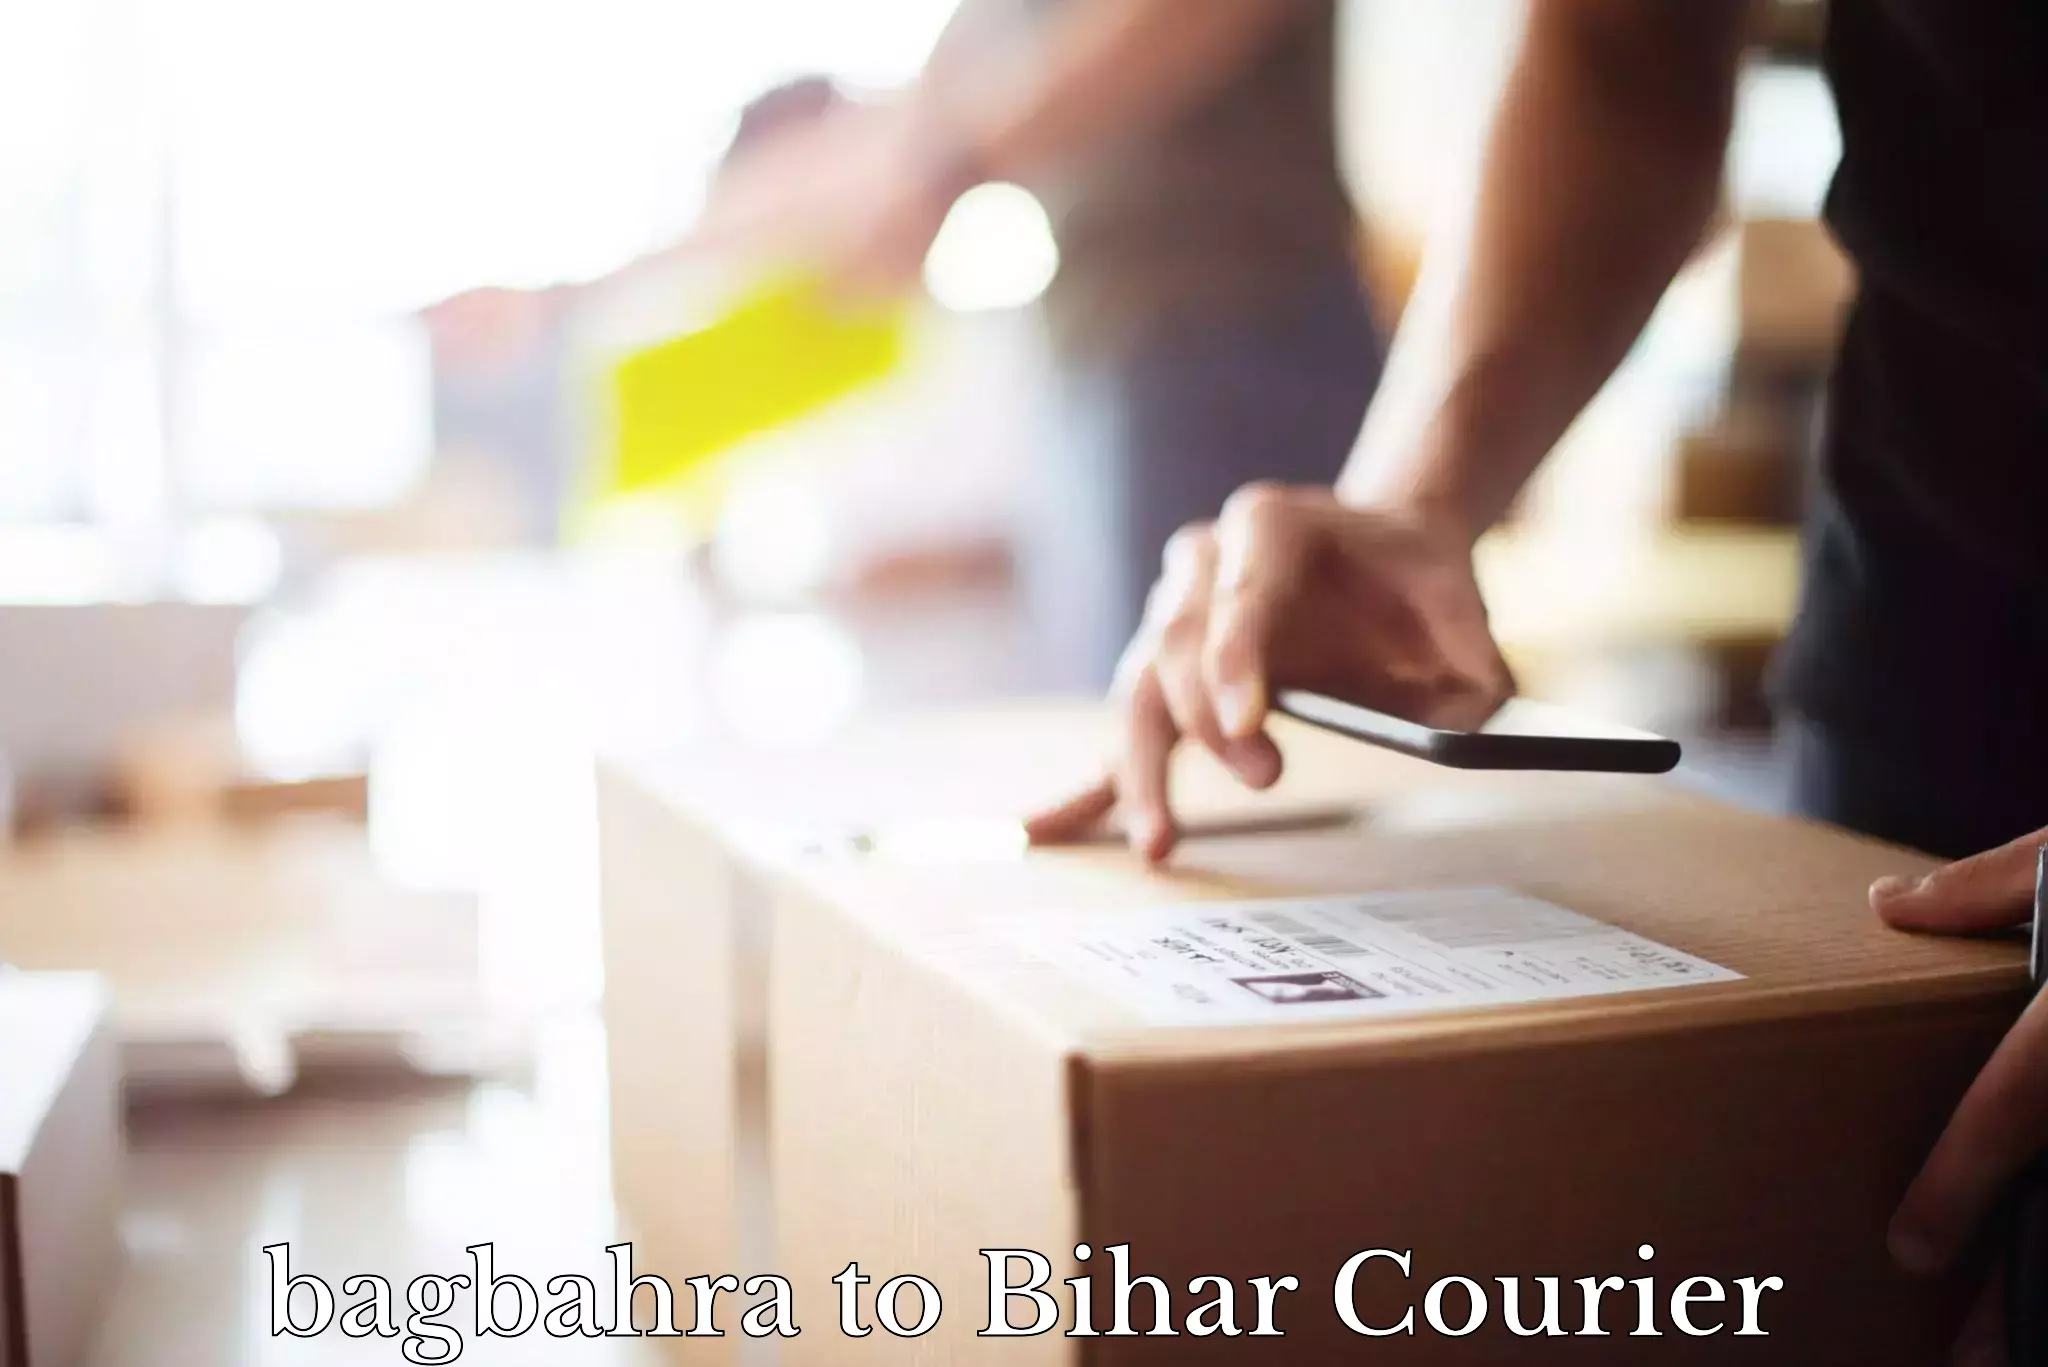 E-commerce shipping partnerships in bagbahra to Bihar